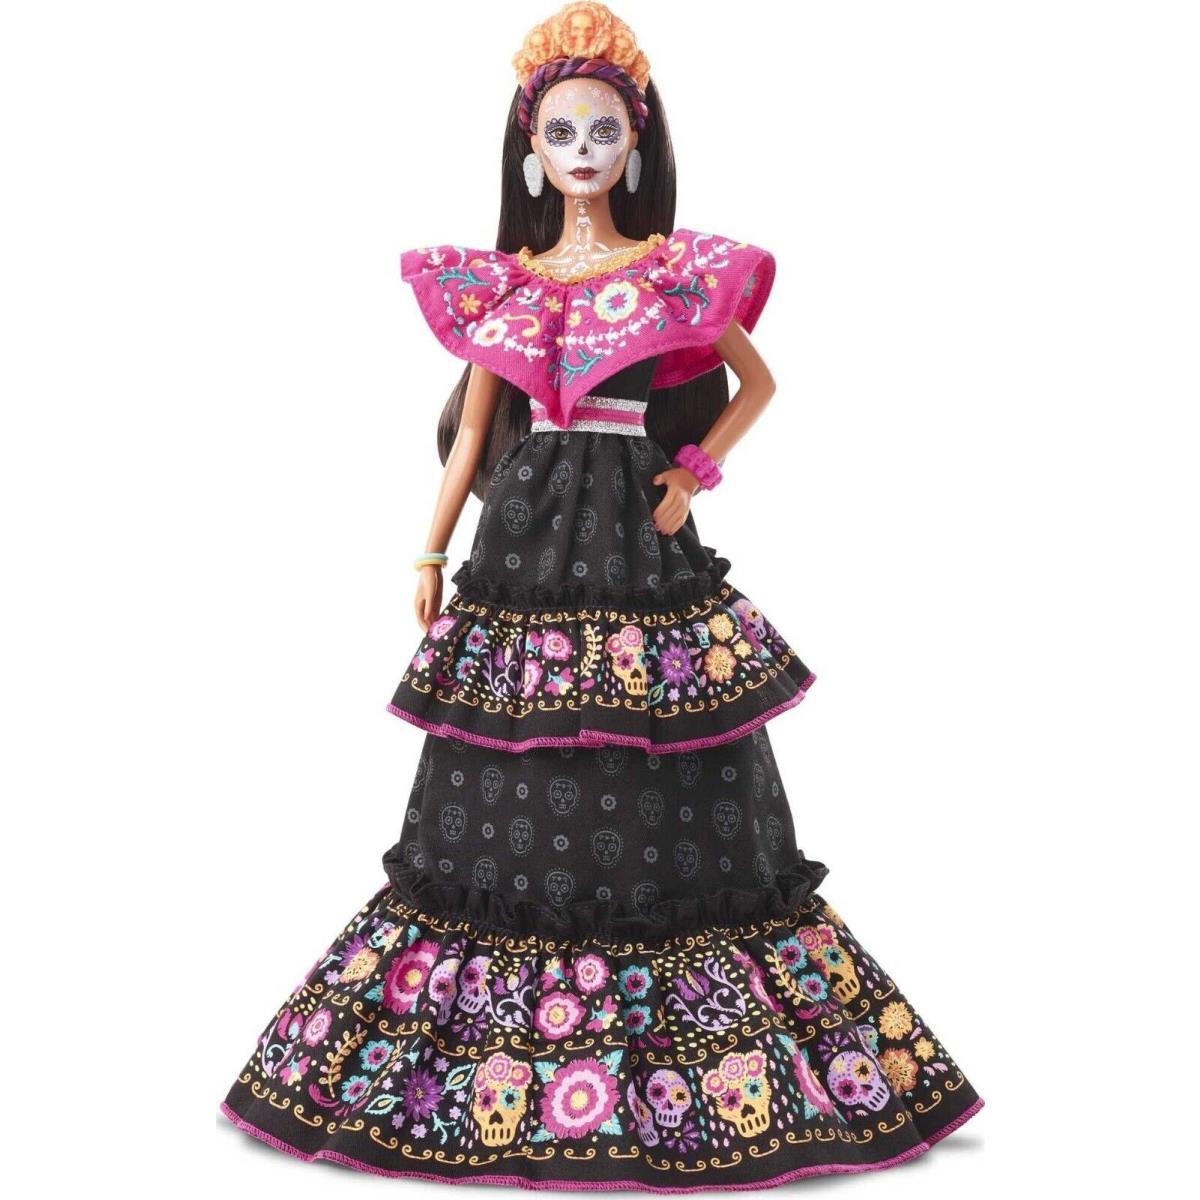 Barbie Signature 2021 Dia de Muertos Collectible Doll in Embroidered Dress